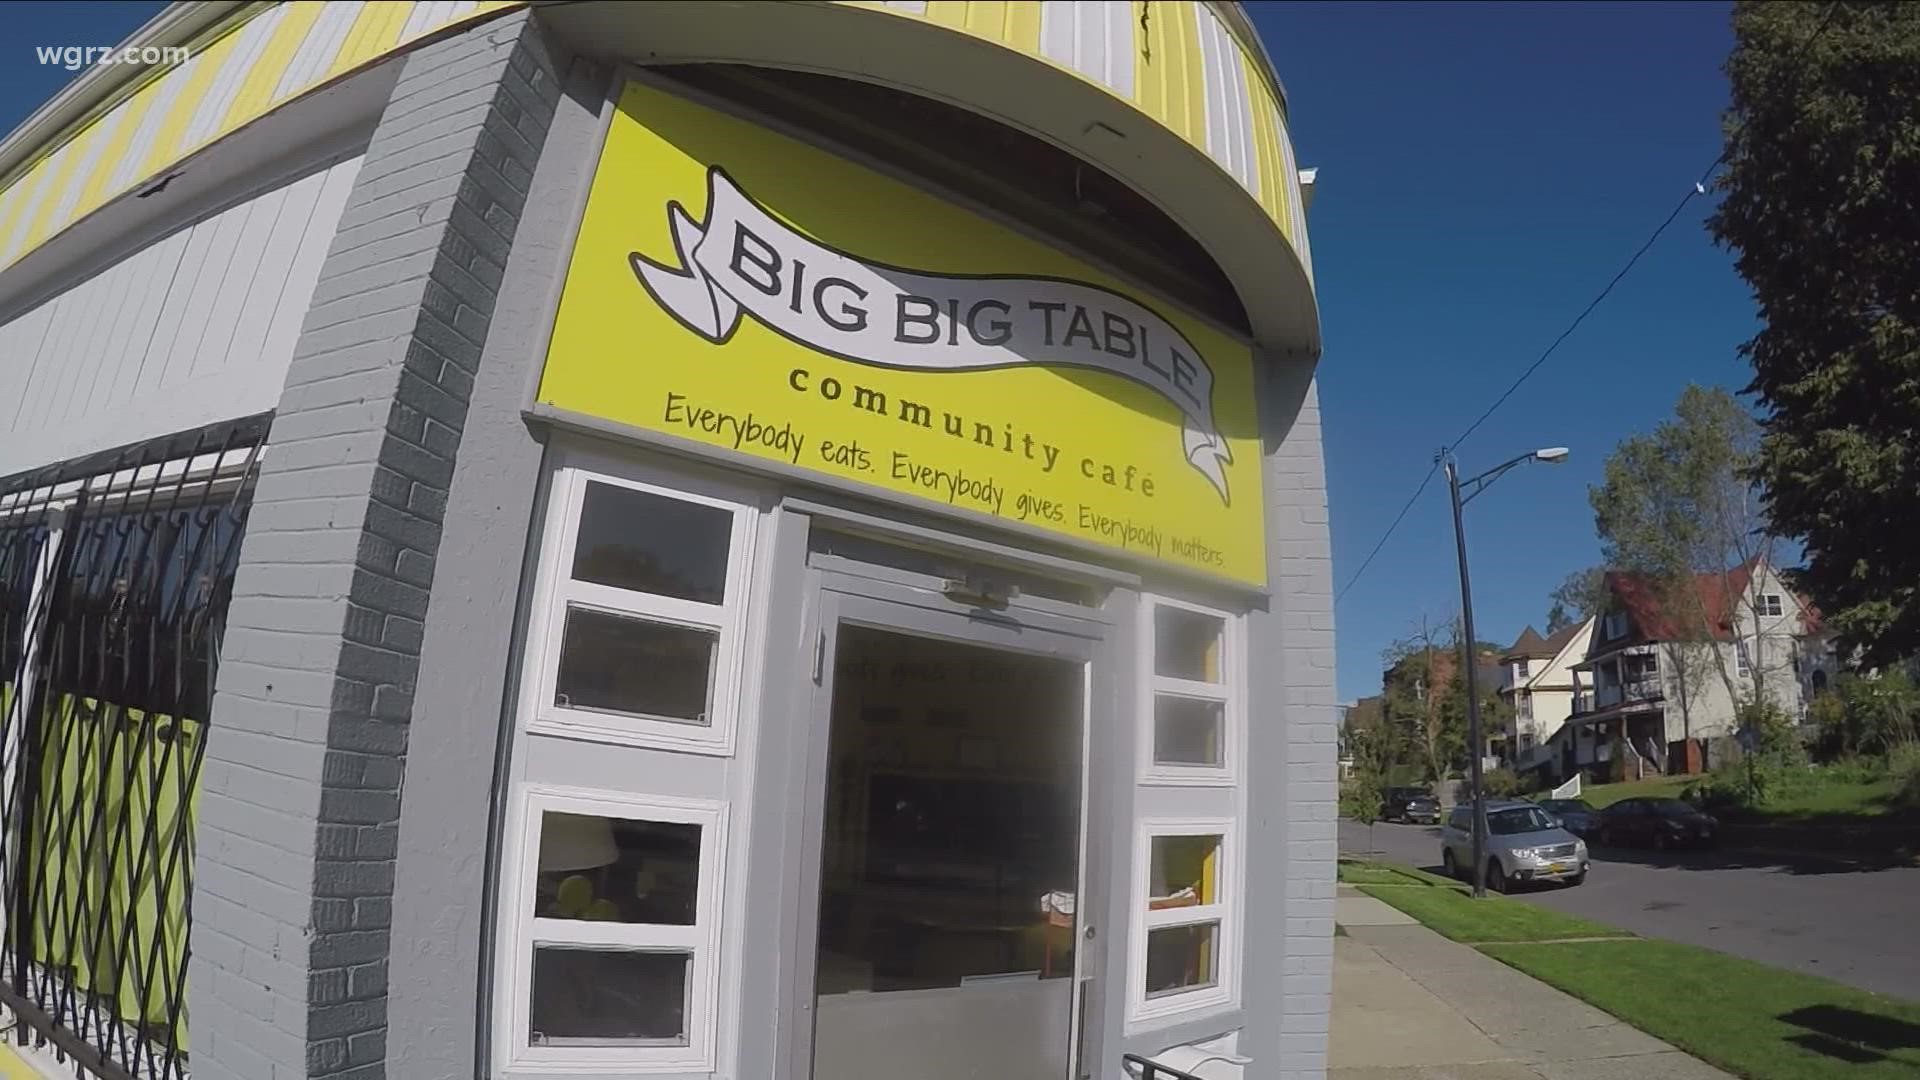 A new community café has opened on Buffalo's West Side giving people the option on how much they pay, or how they pay, for what they order.